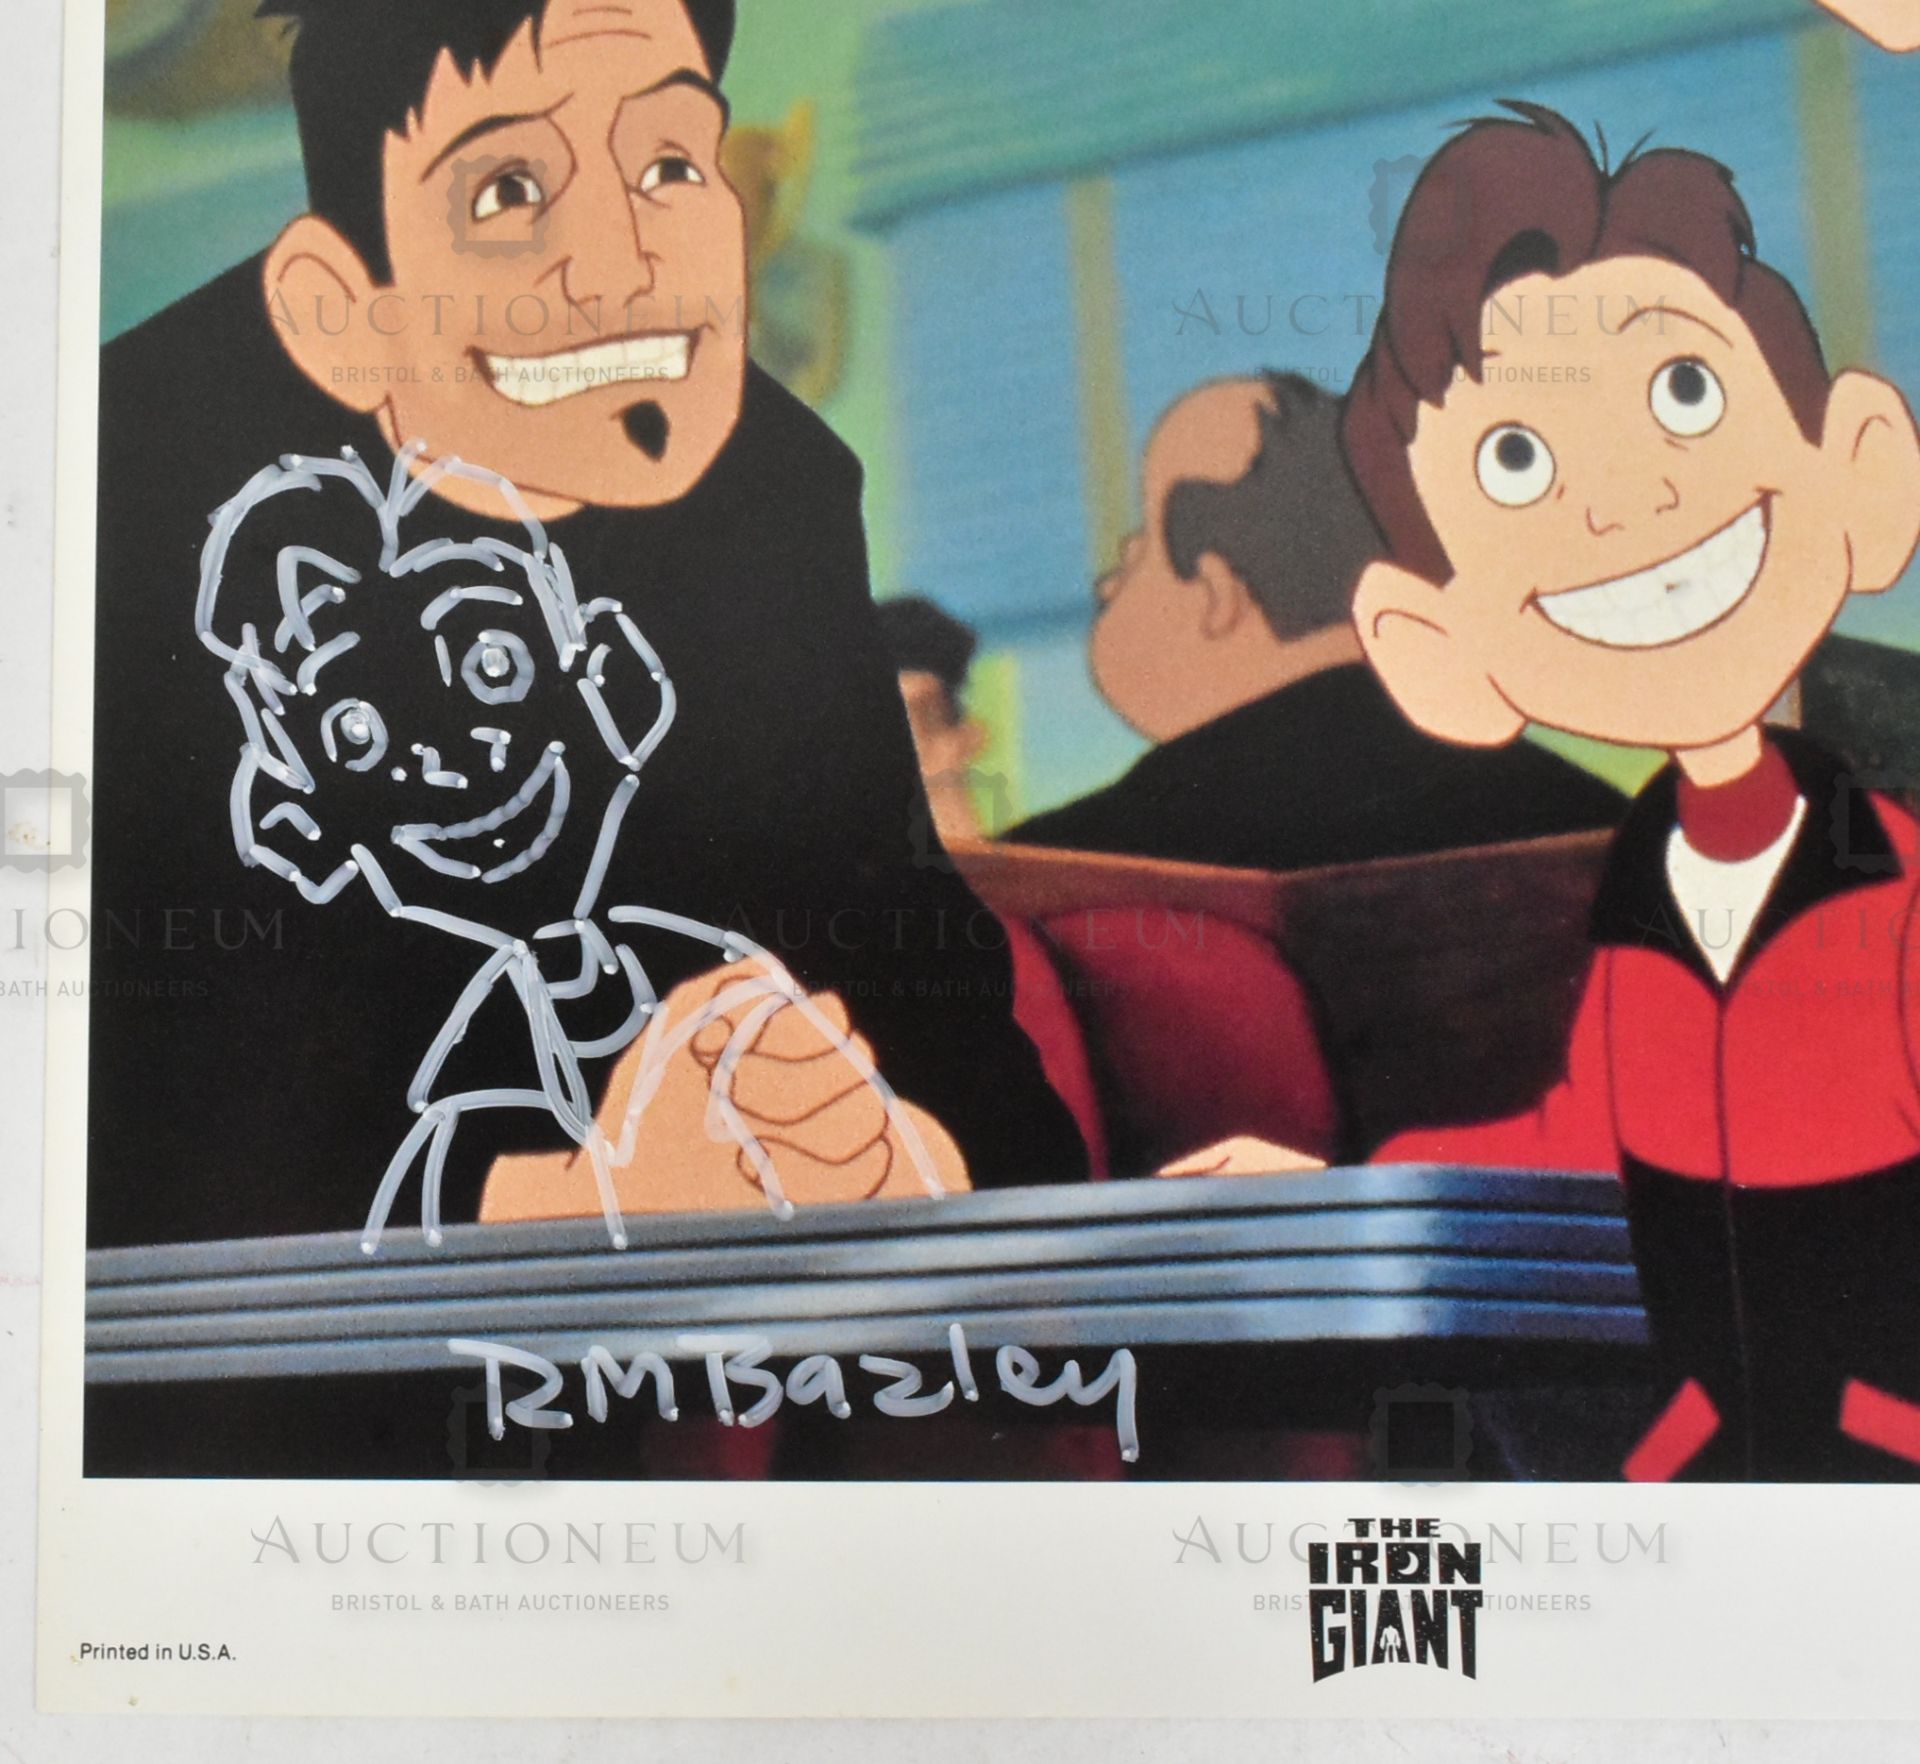 THE IRON GIANT - ORIGINAL SIGNED LOBBY CARD - Image 2 of 2